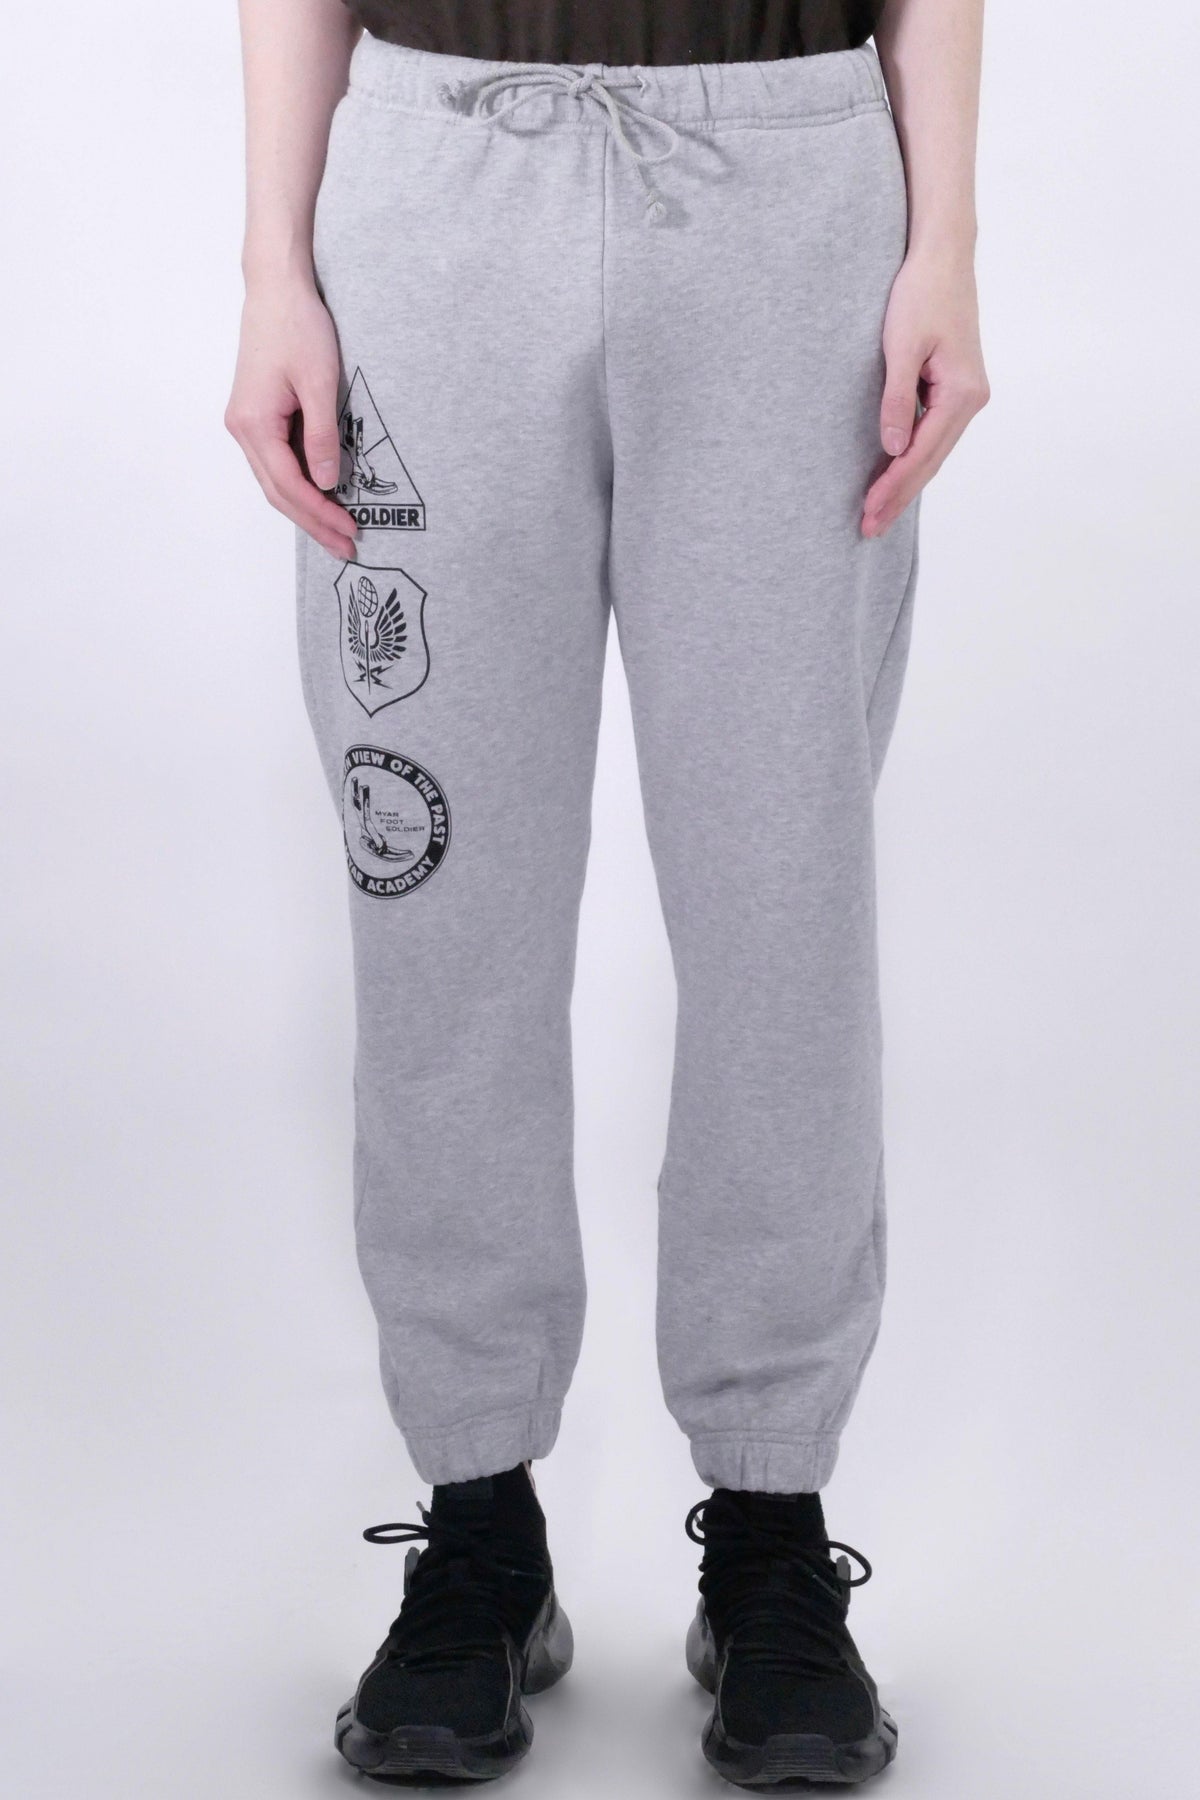 Myar MYPA15 Upcycling 2020 Pant - Grey - Due West